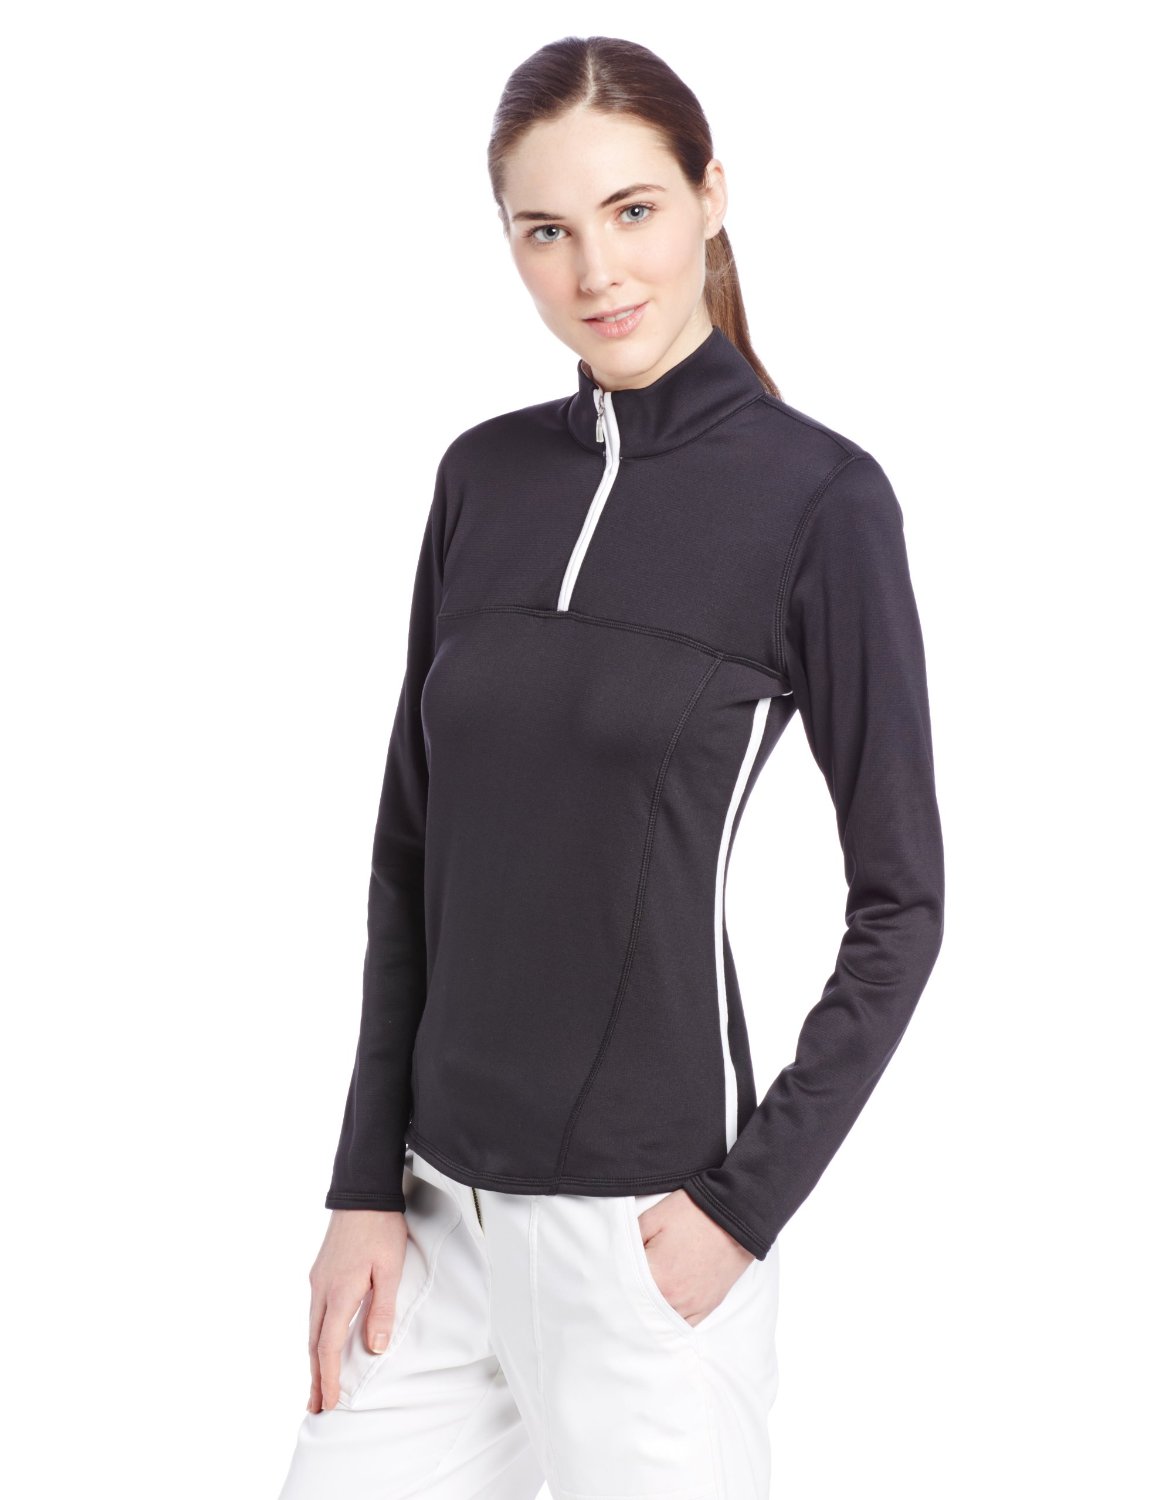 Adidas Climawarm Plus Golf Pullovers